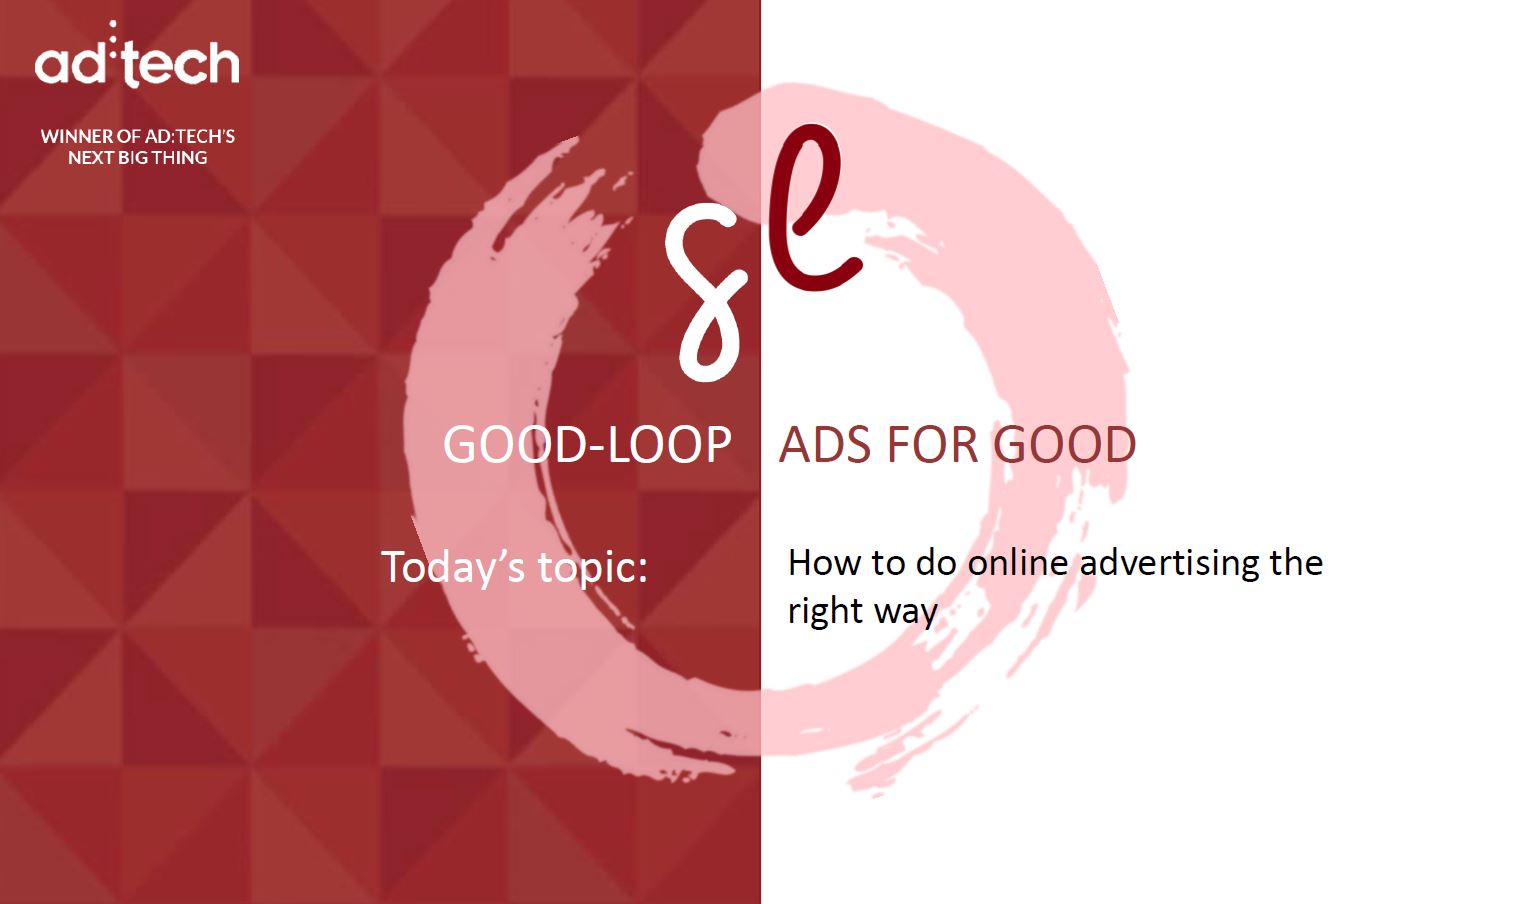 How to do online advertising the right way